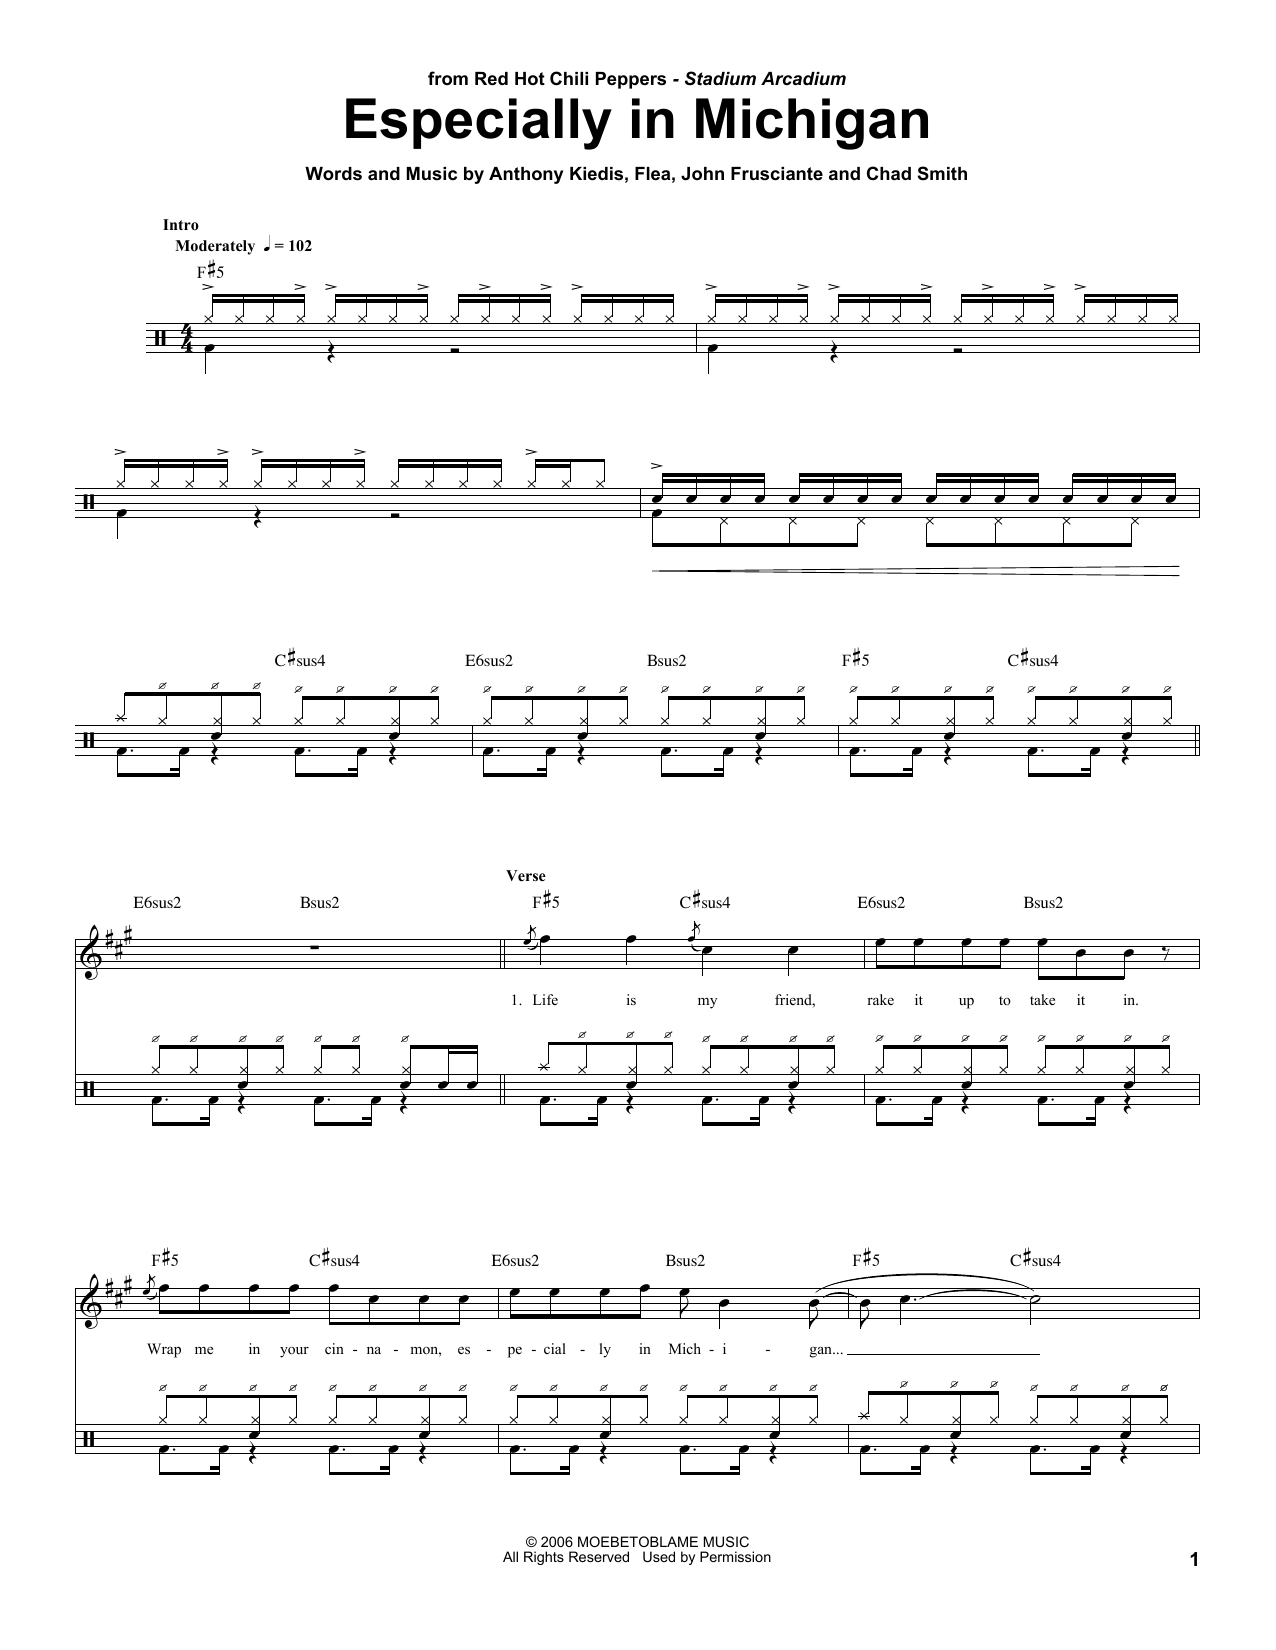 Download Red Hot Chili Peppers Especially In Michigan Sheet Music